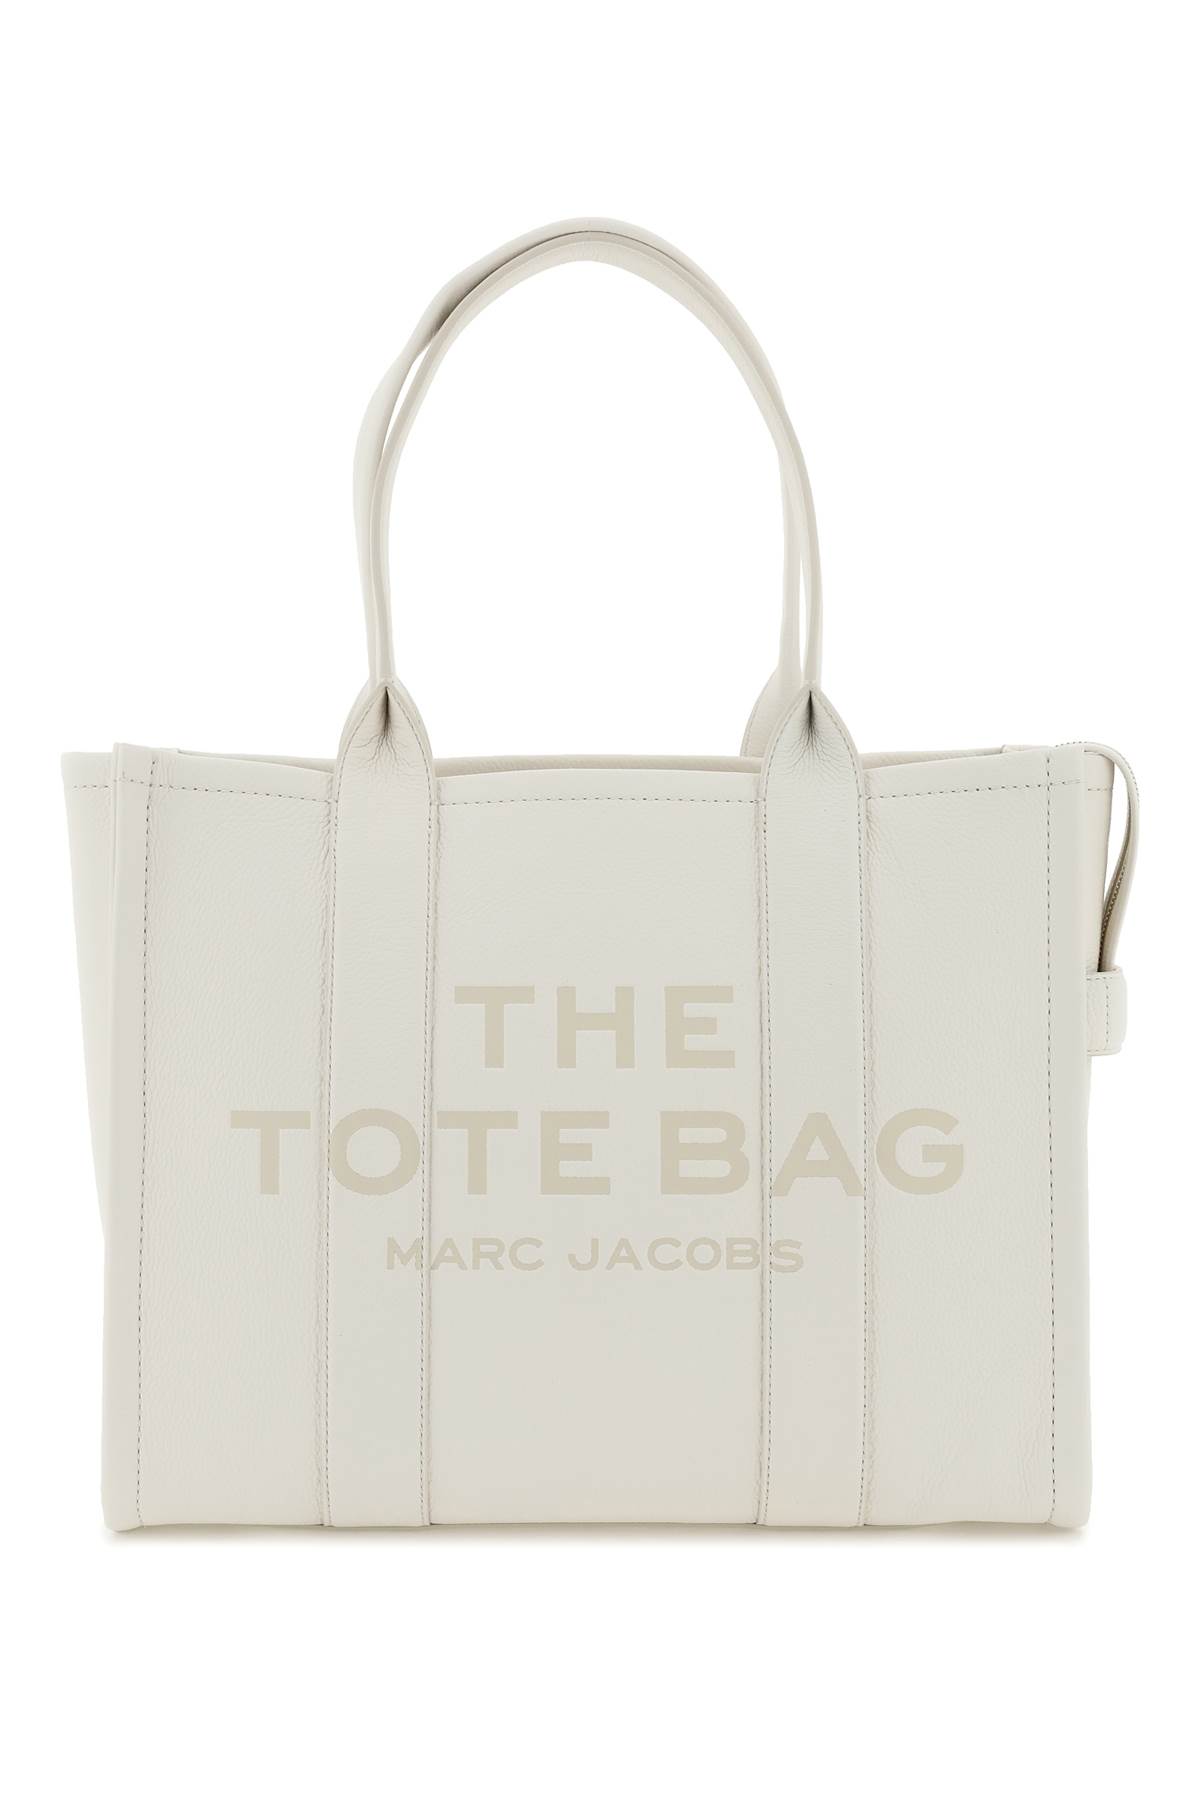 Marc Jacobs The Leather Large Tote Bag In White